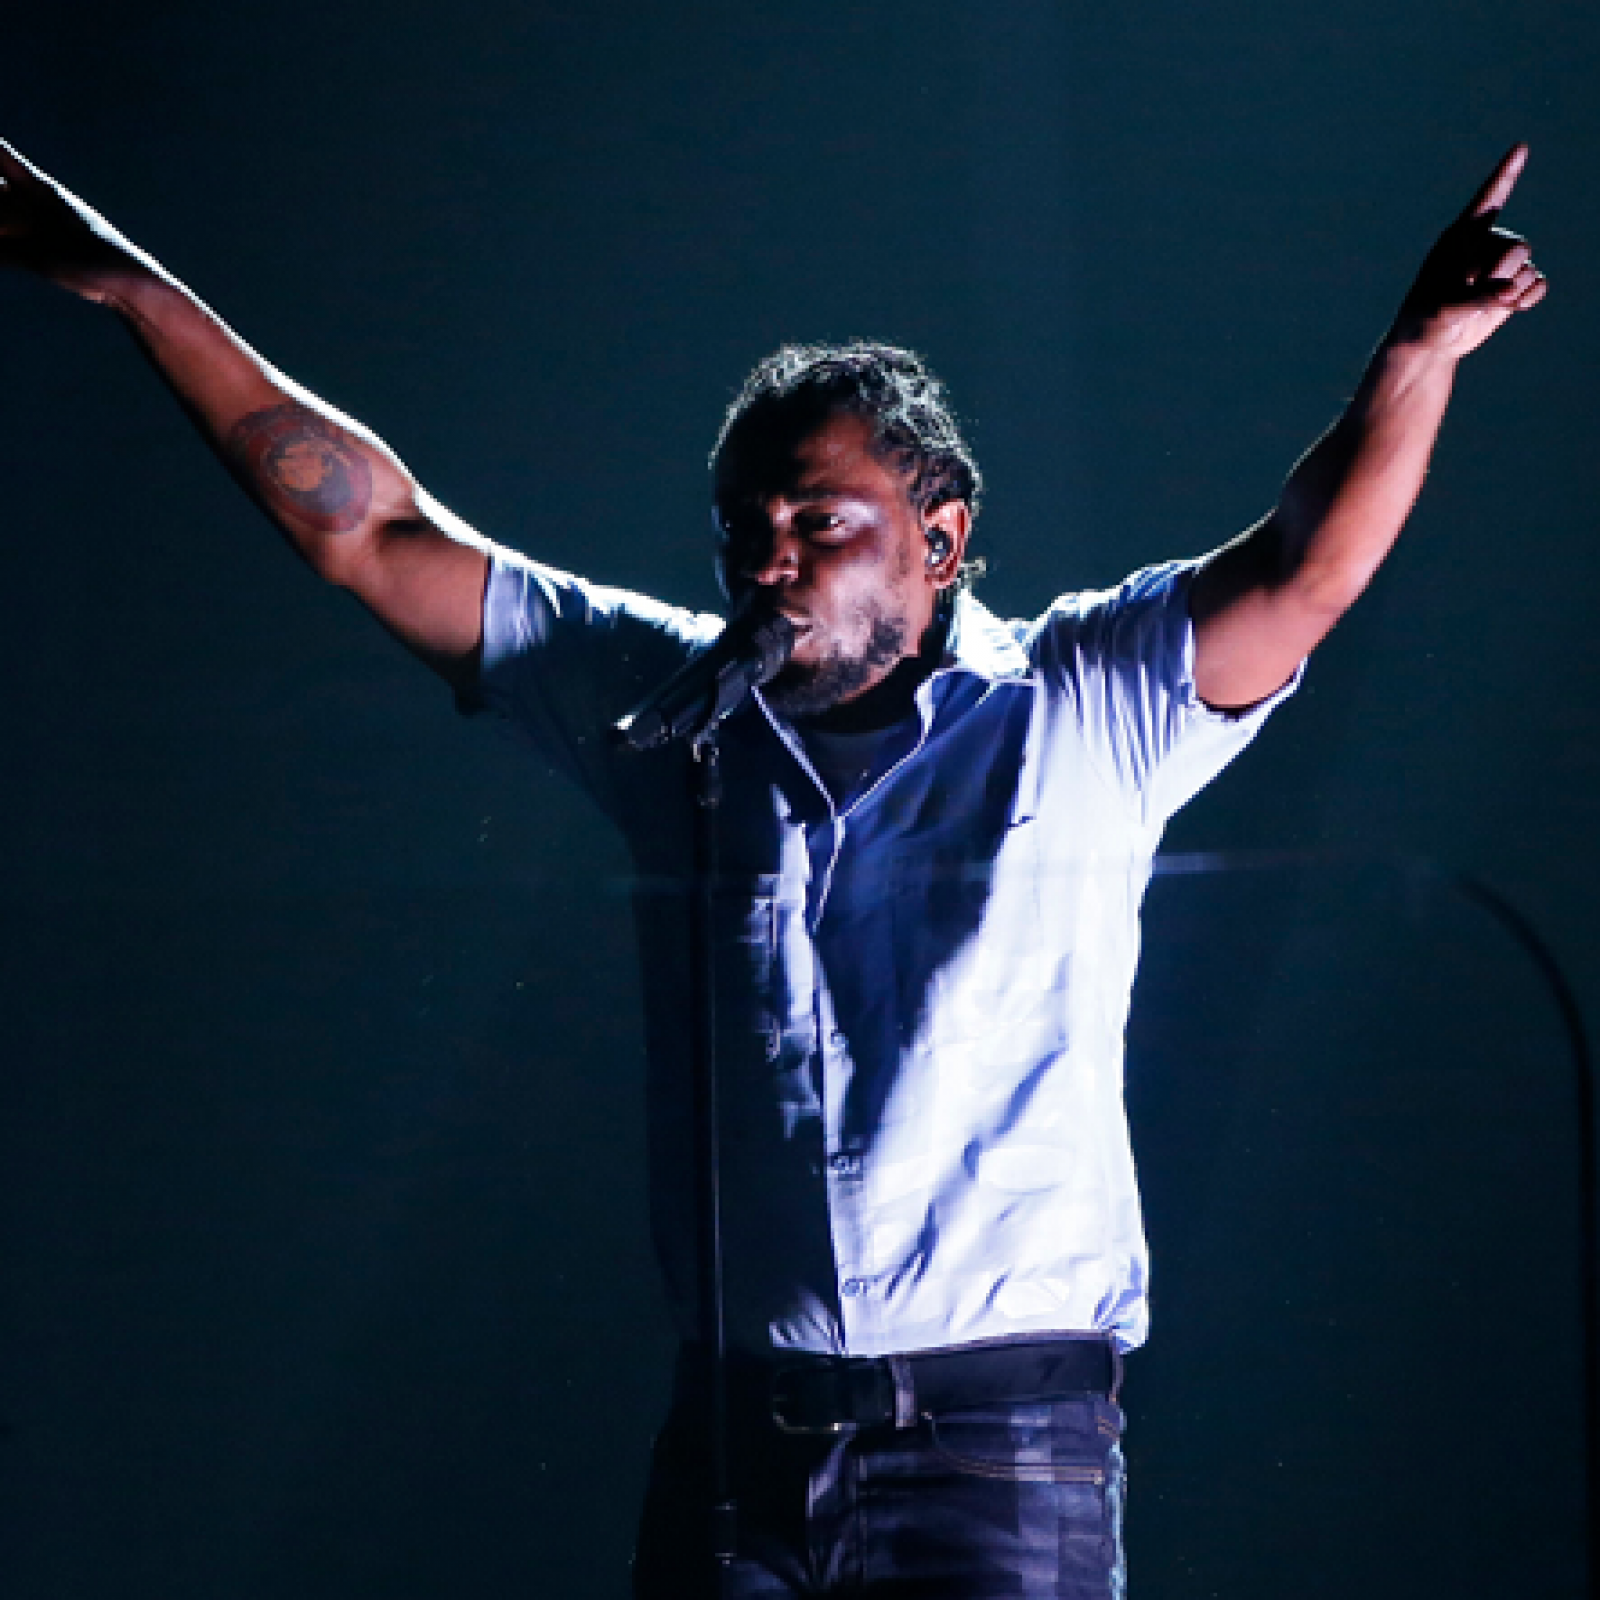 Kendrick Lamar's Praise Of 'Natural' Beauty Sparked More Misogyny